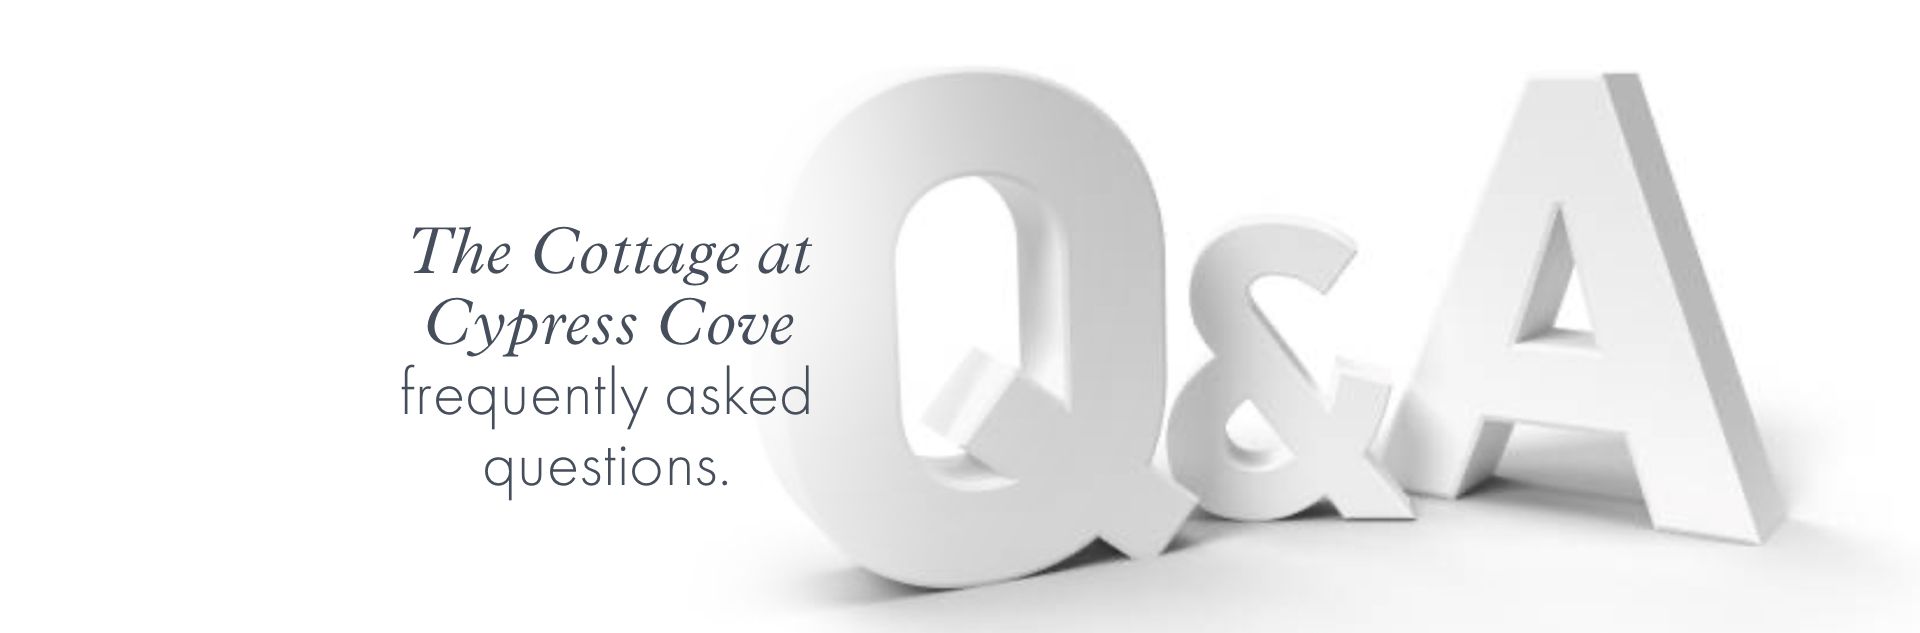 The Cottage at Cypress Cove frequently asked questions.